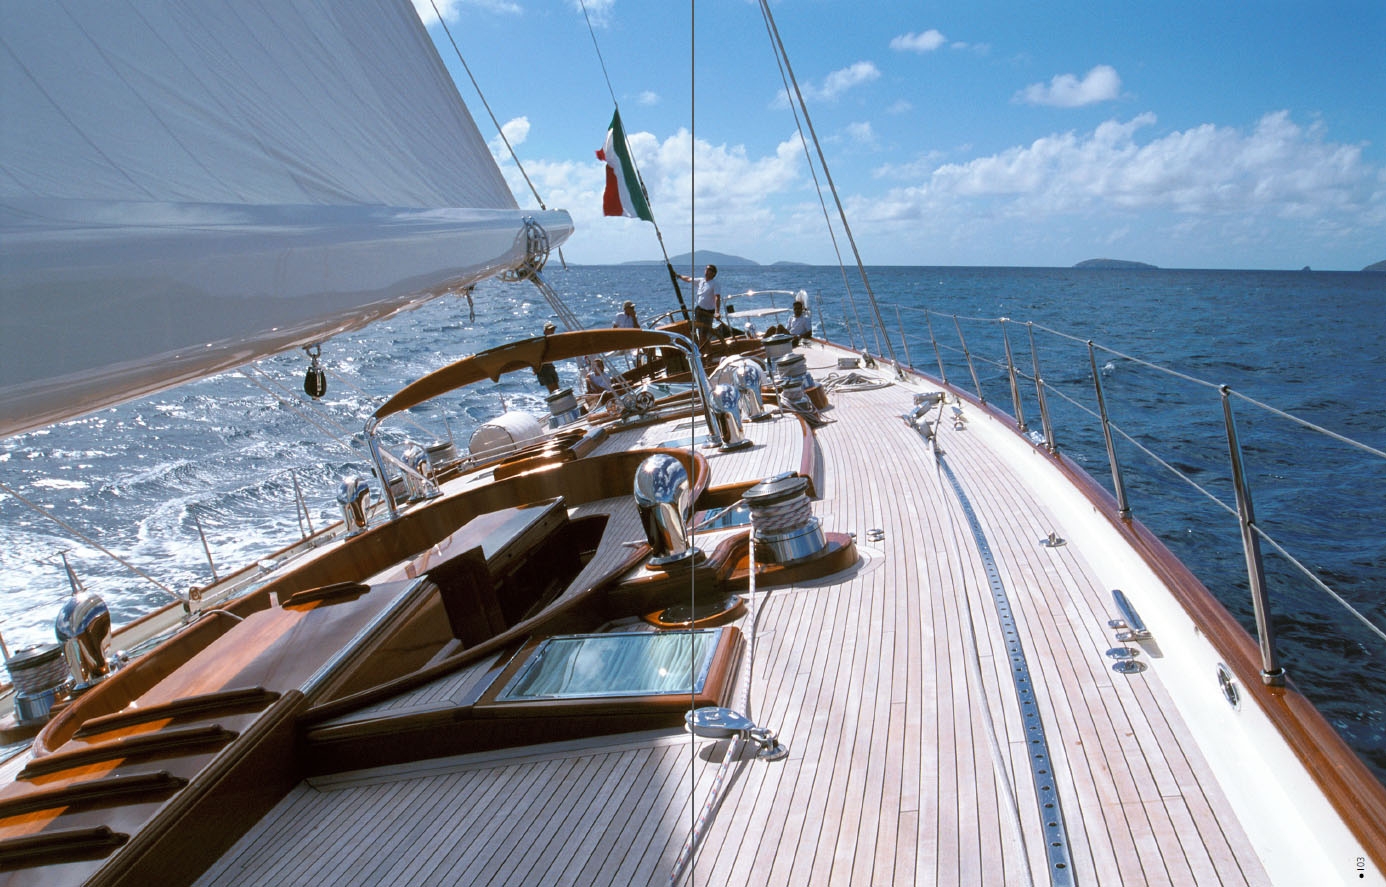 Step into the Hodgdon 128’ Antonisa, a highly crafted vessel